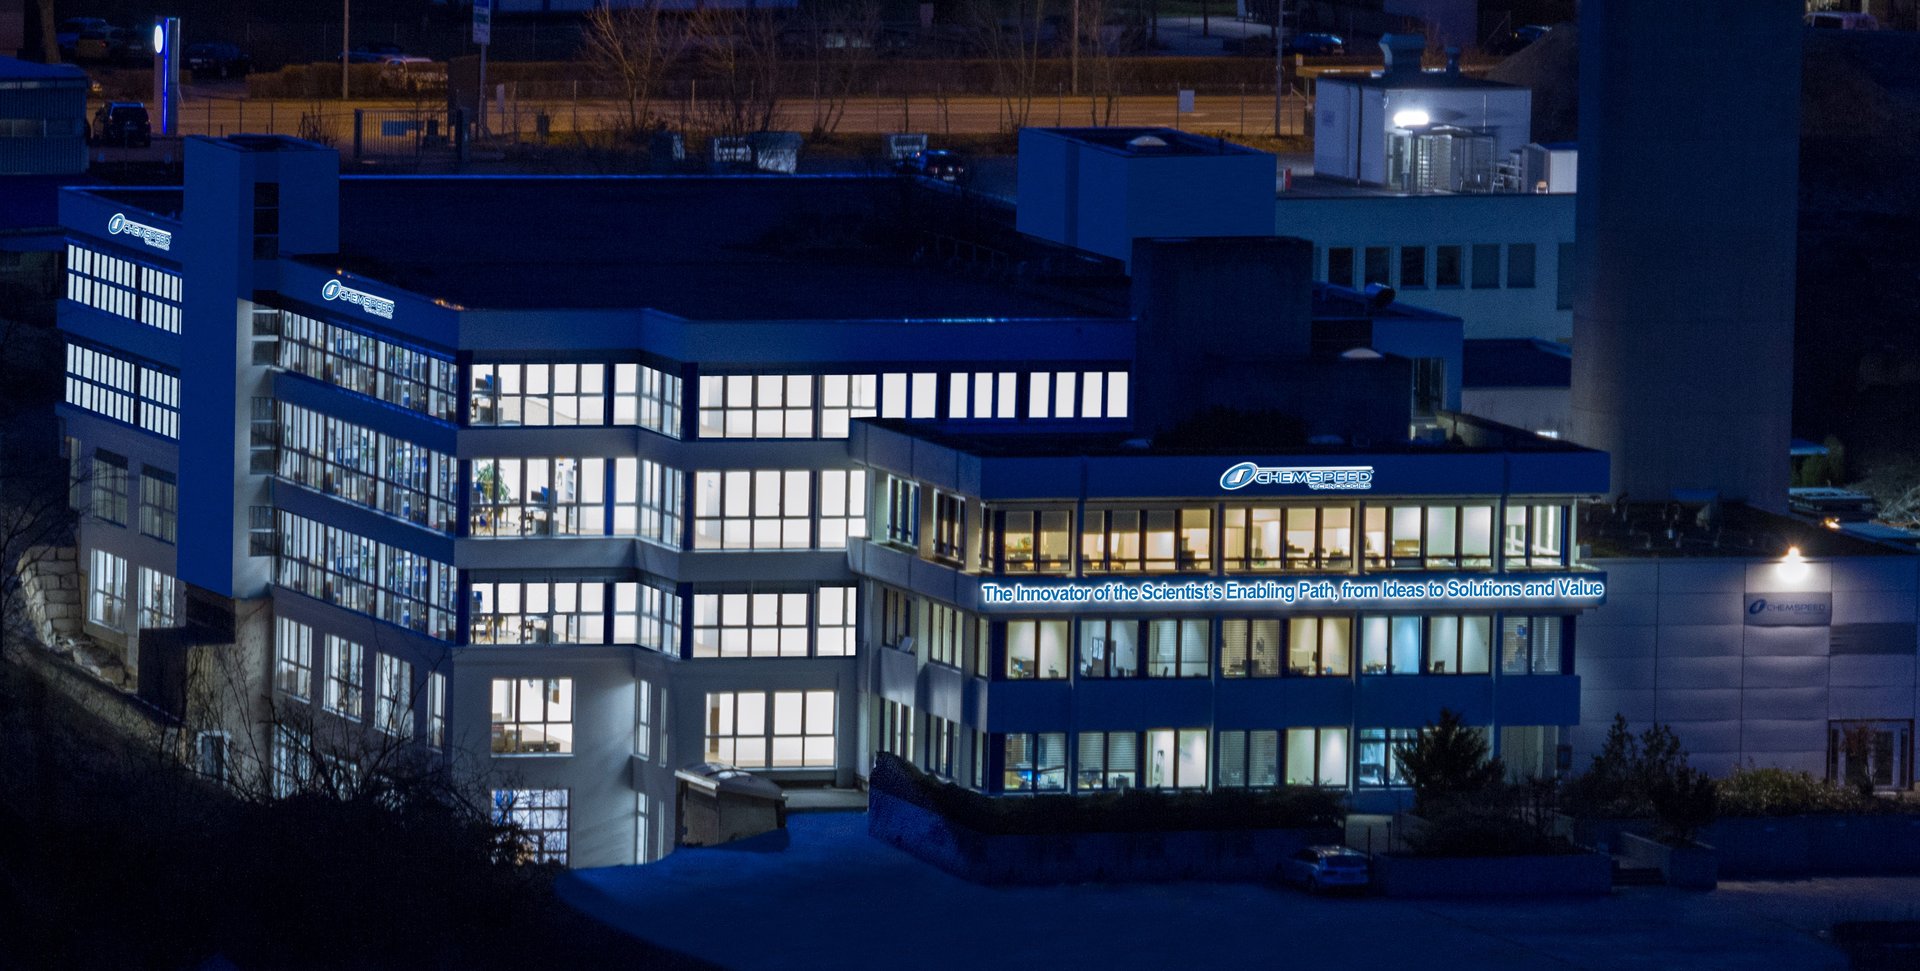 A nighttime shot of Chemspeed's headquarters in fullinsdorf switzerland with all the lights on in the office